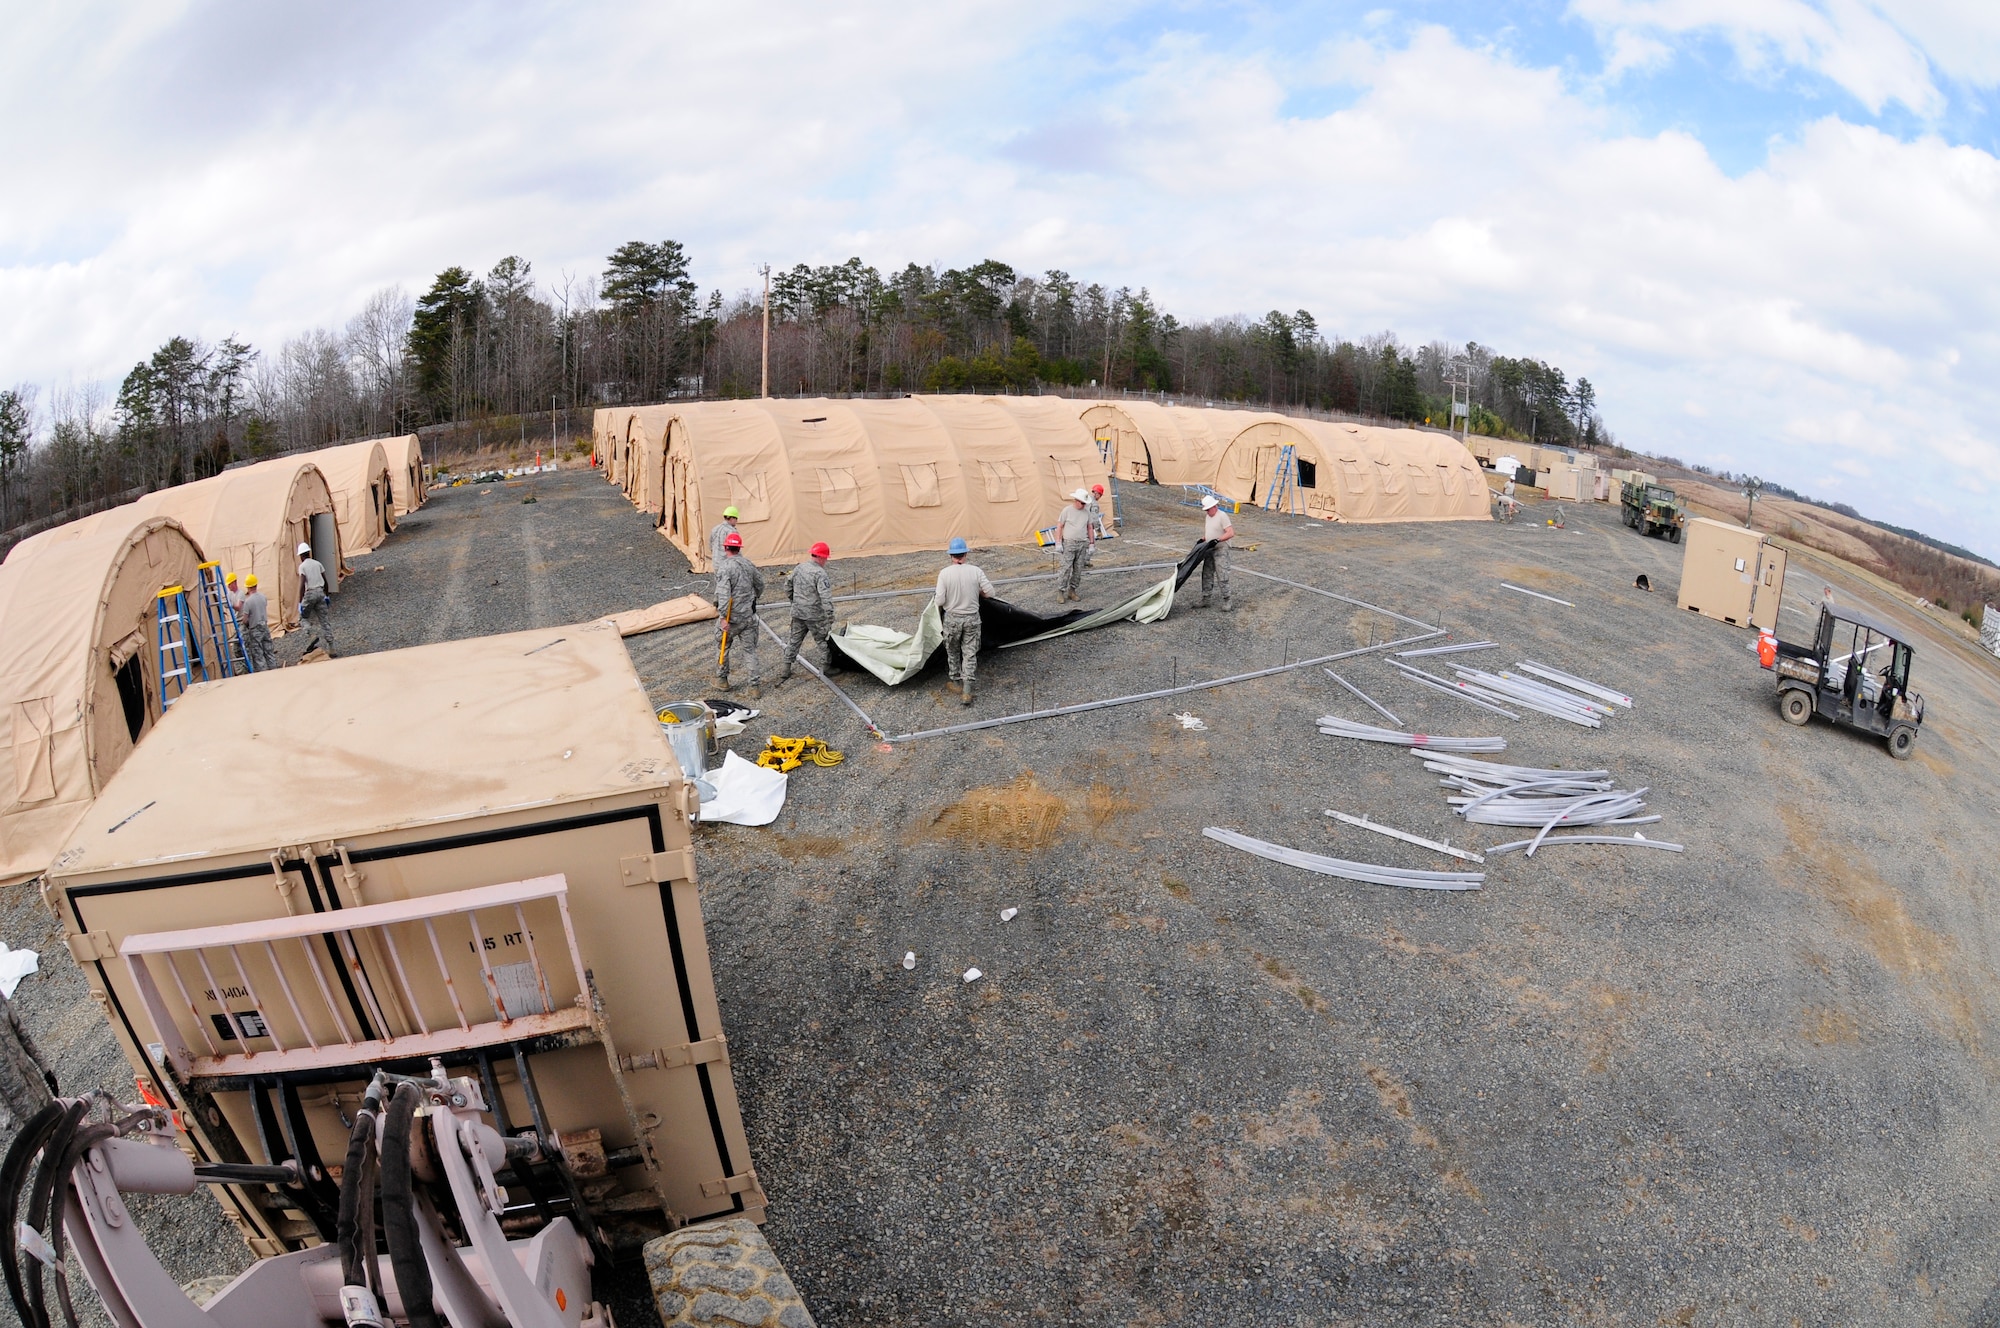 Members from the U.S. Air National Guard, 145th Civil Engineer Squadron, install 16 Alaskan Small Shelter Systems at the 145th CES-Regional Training Site, New London, N.C. to provide lodging for over 200 personnel participating in Vigilant Guard 2015, March 6-8, 2015. Vigilant Guard 2015 is an exercise that provides an opportunity for Army and Air National Guard, North Carolina Emergency Management and county civilian partners to come together to train as true partners in order to respond effectively to natural disasters. (U.S. Air National Guard photo by Master Sgt. Patricia F. Moran, 145th Public Affairs/Released)